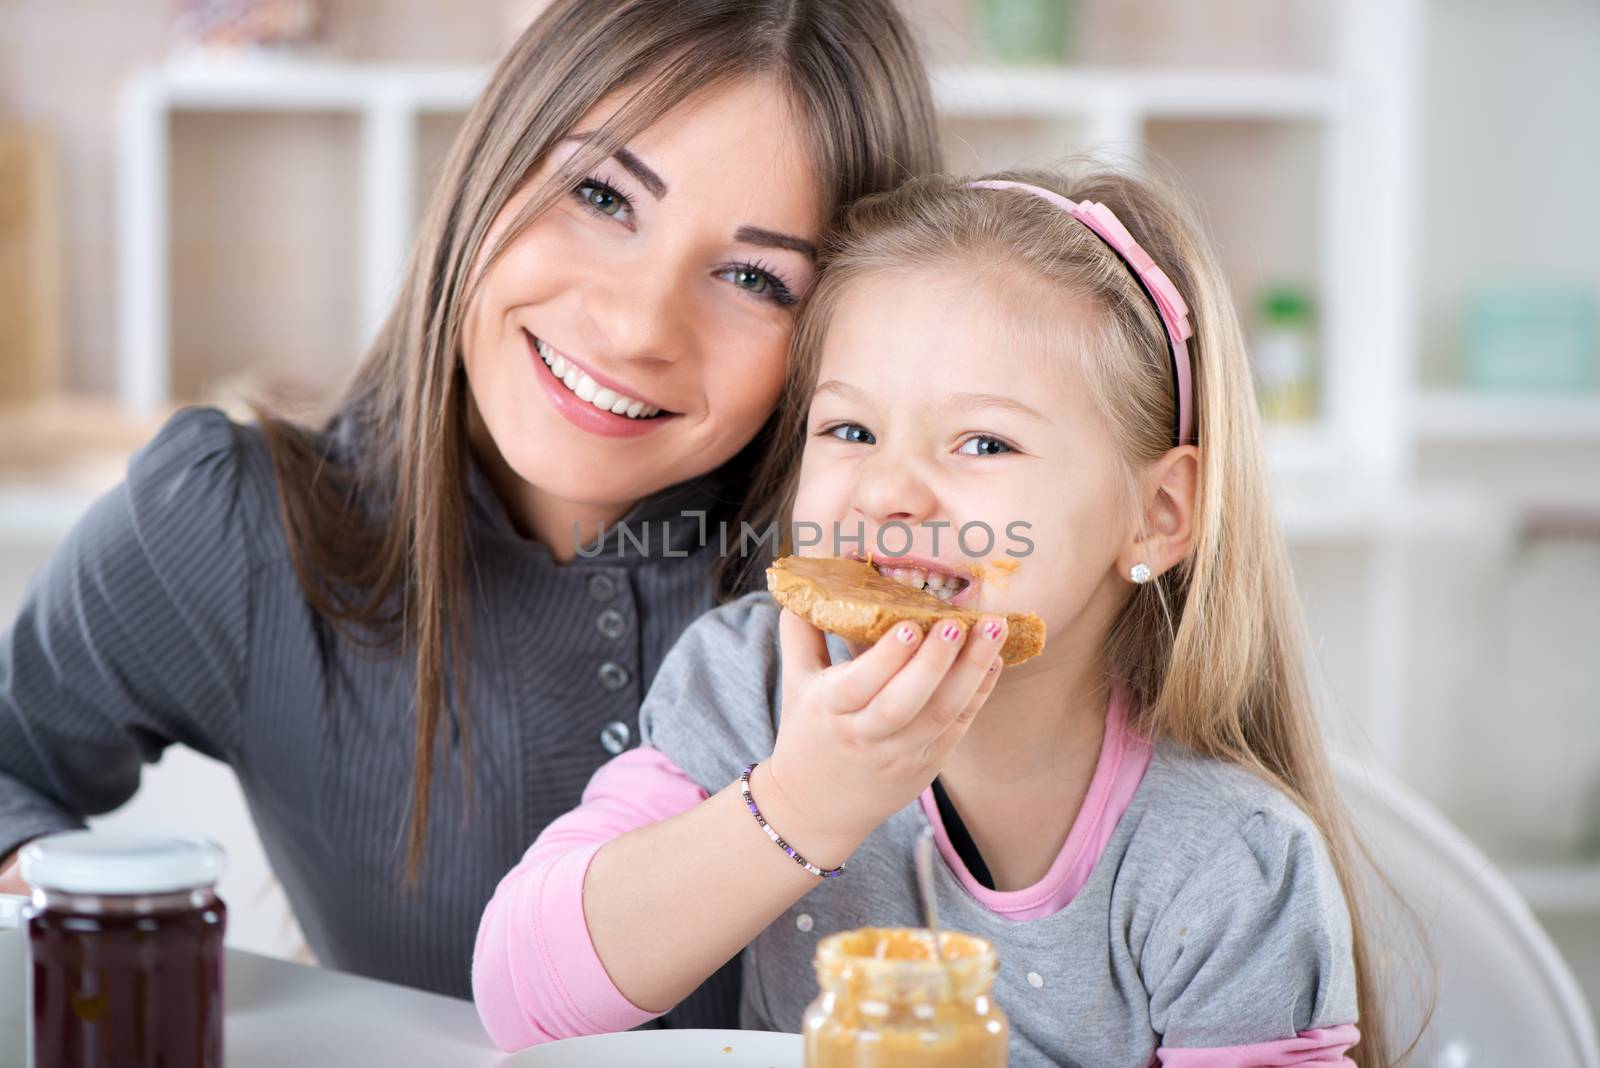 Mother and daughter breakfast in the kitchen. Cute little girl eats bread with peanut butter. Looking at Camera.